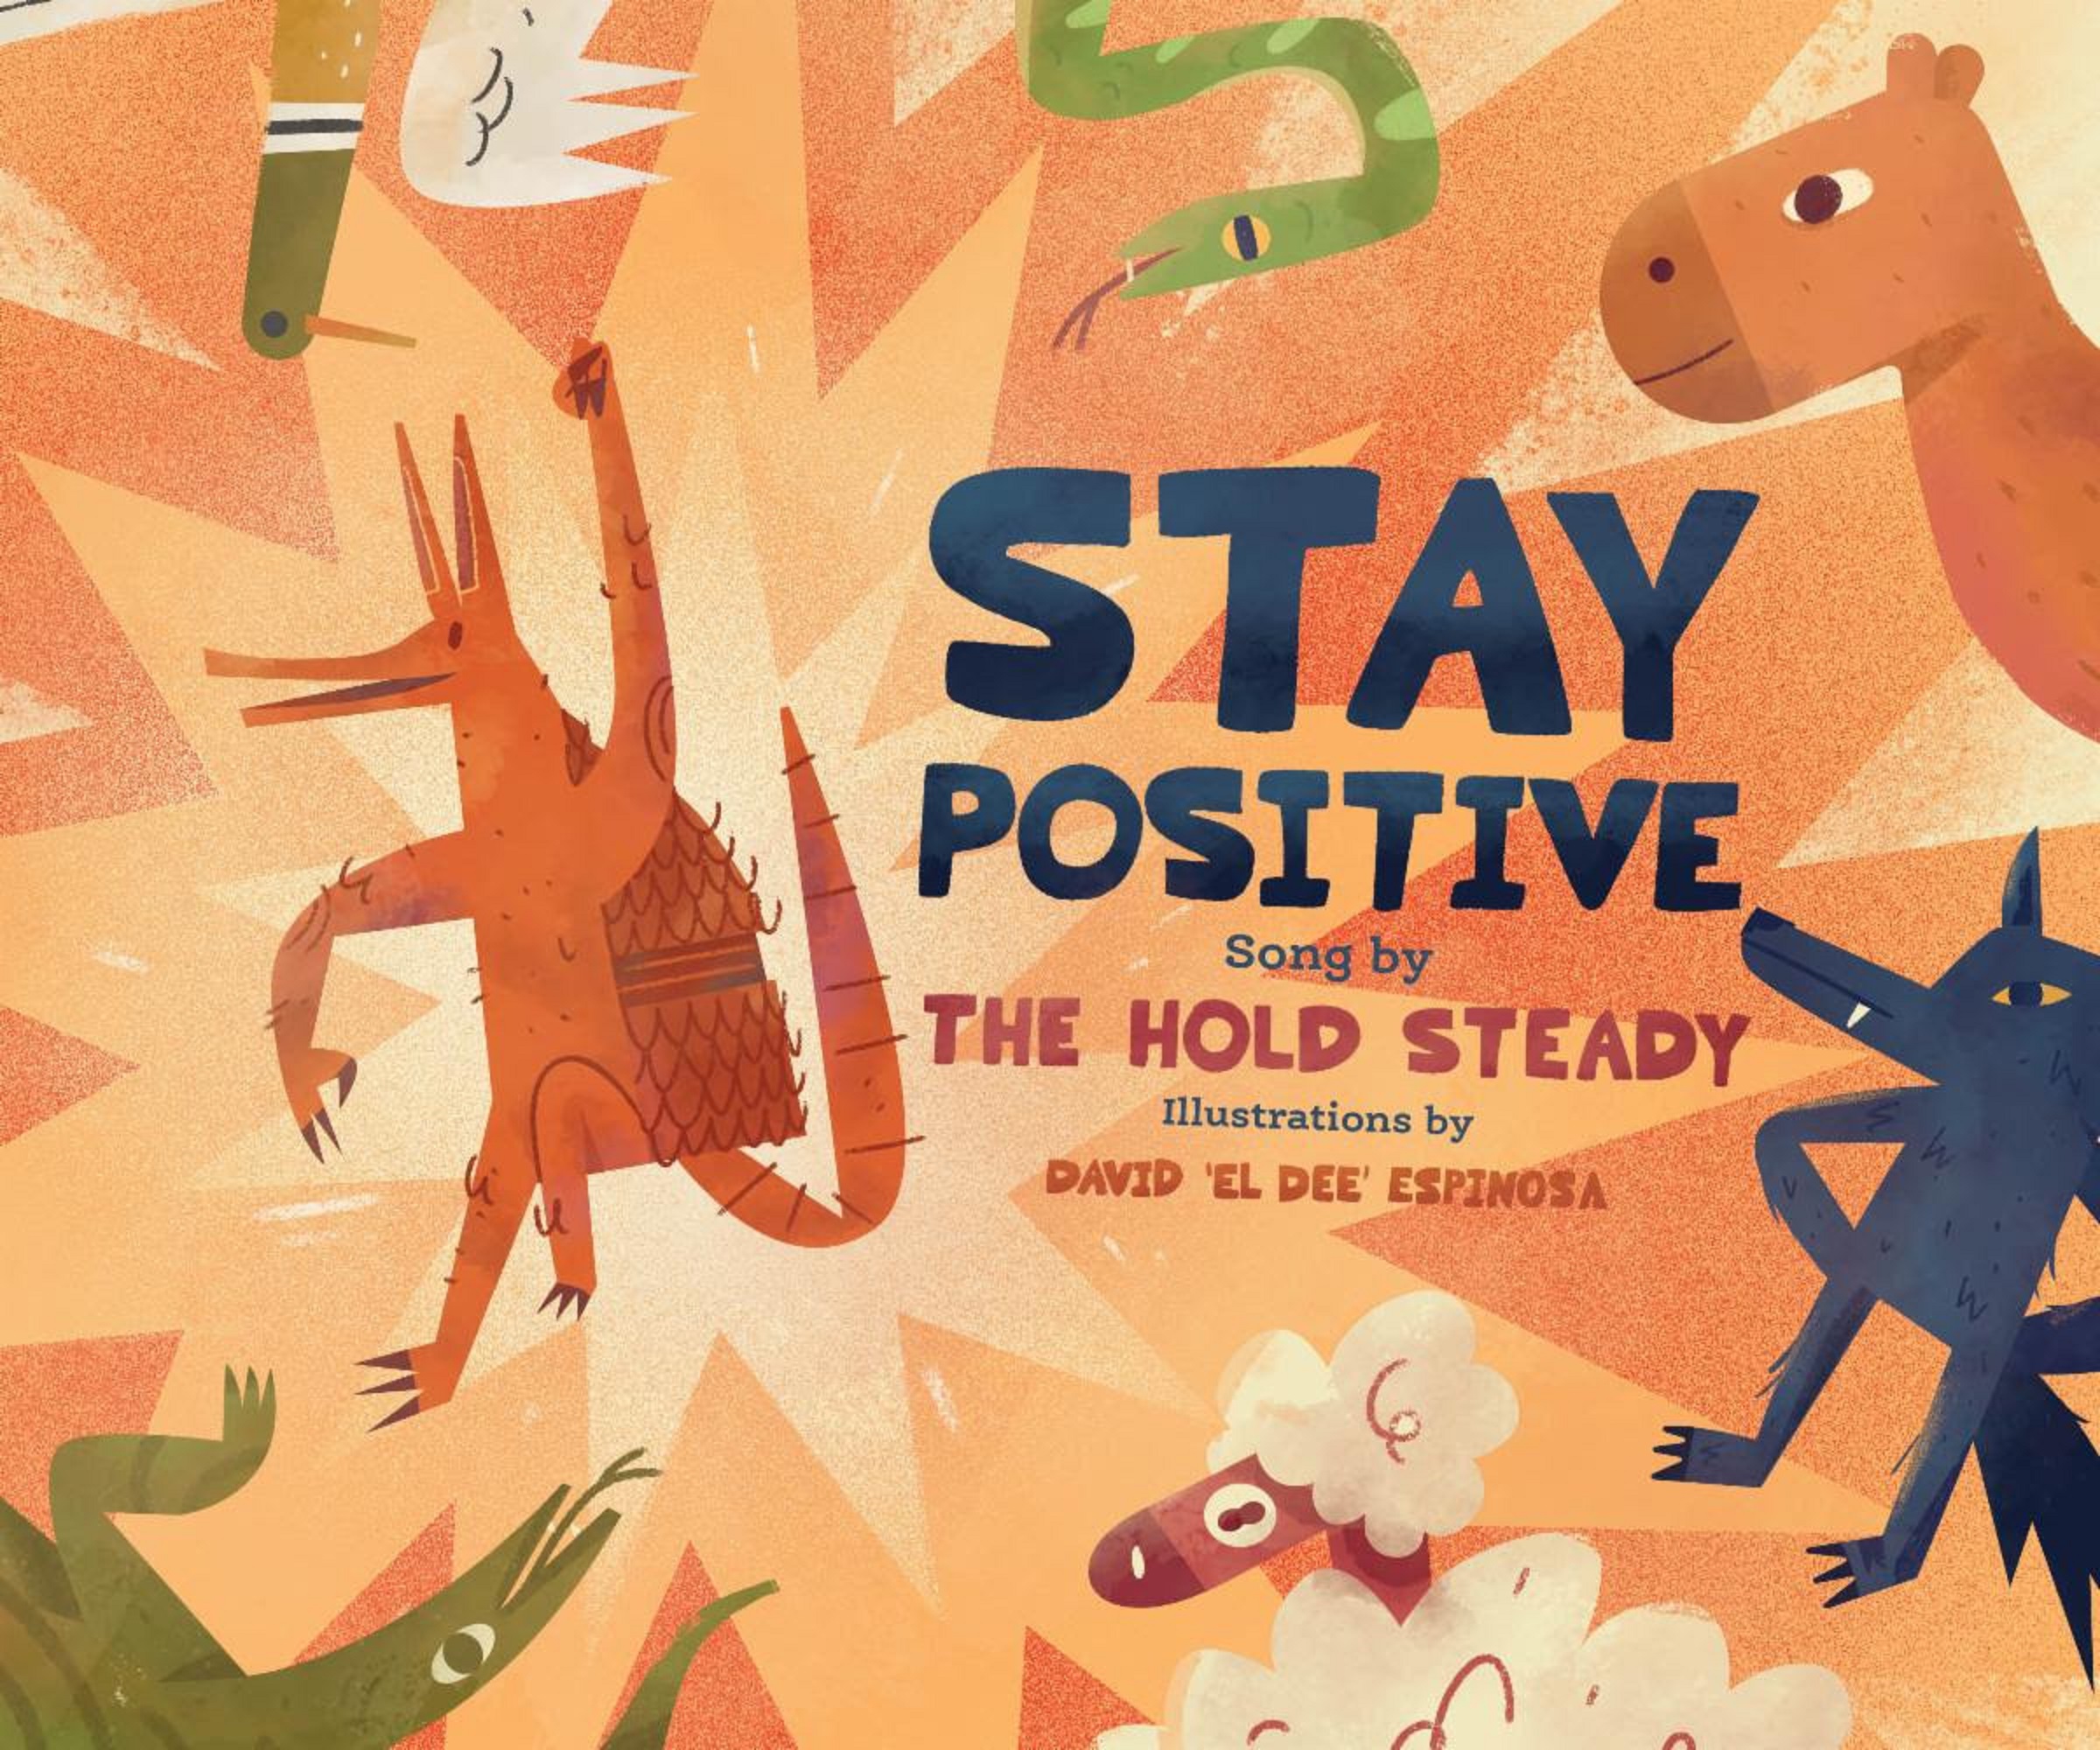 The Hold Steady to Release Children's Book, "Stay Positive"